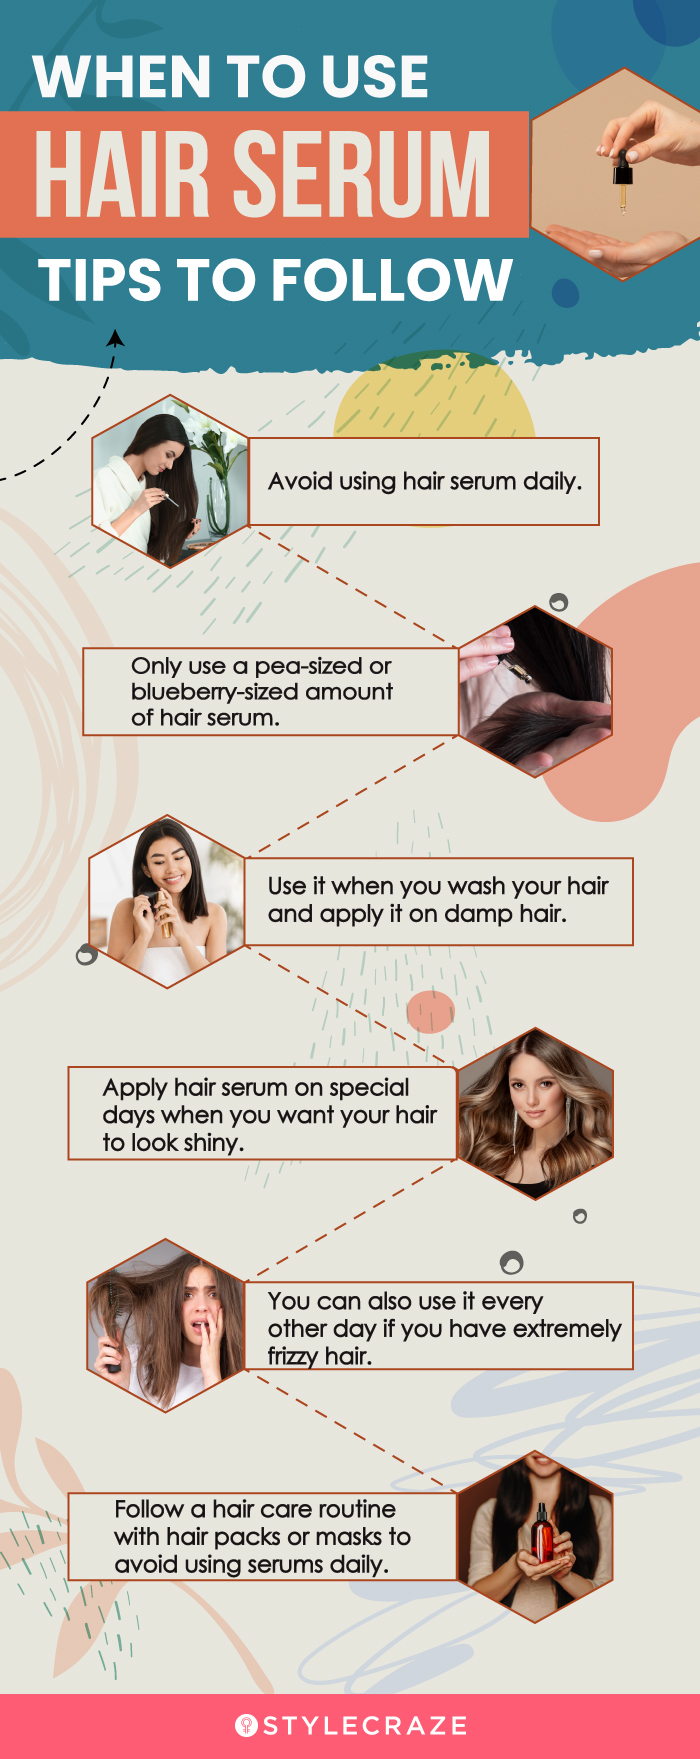 when to use hair serum tips to follow [infographic]